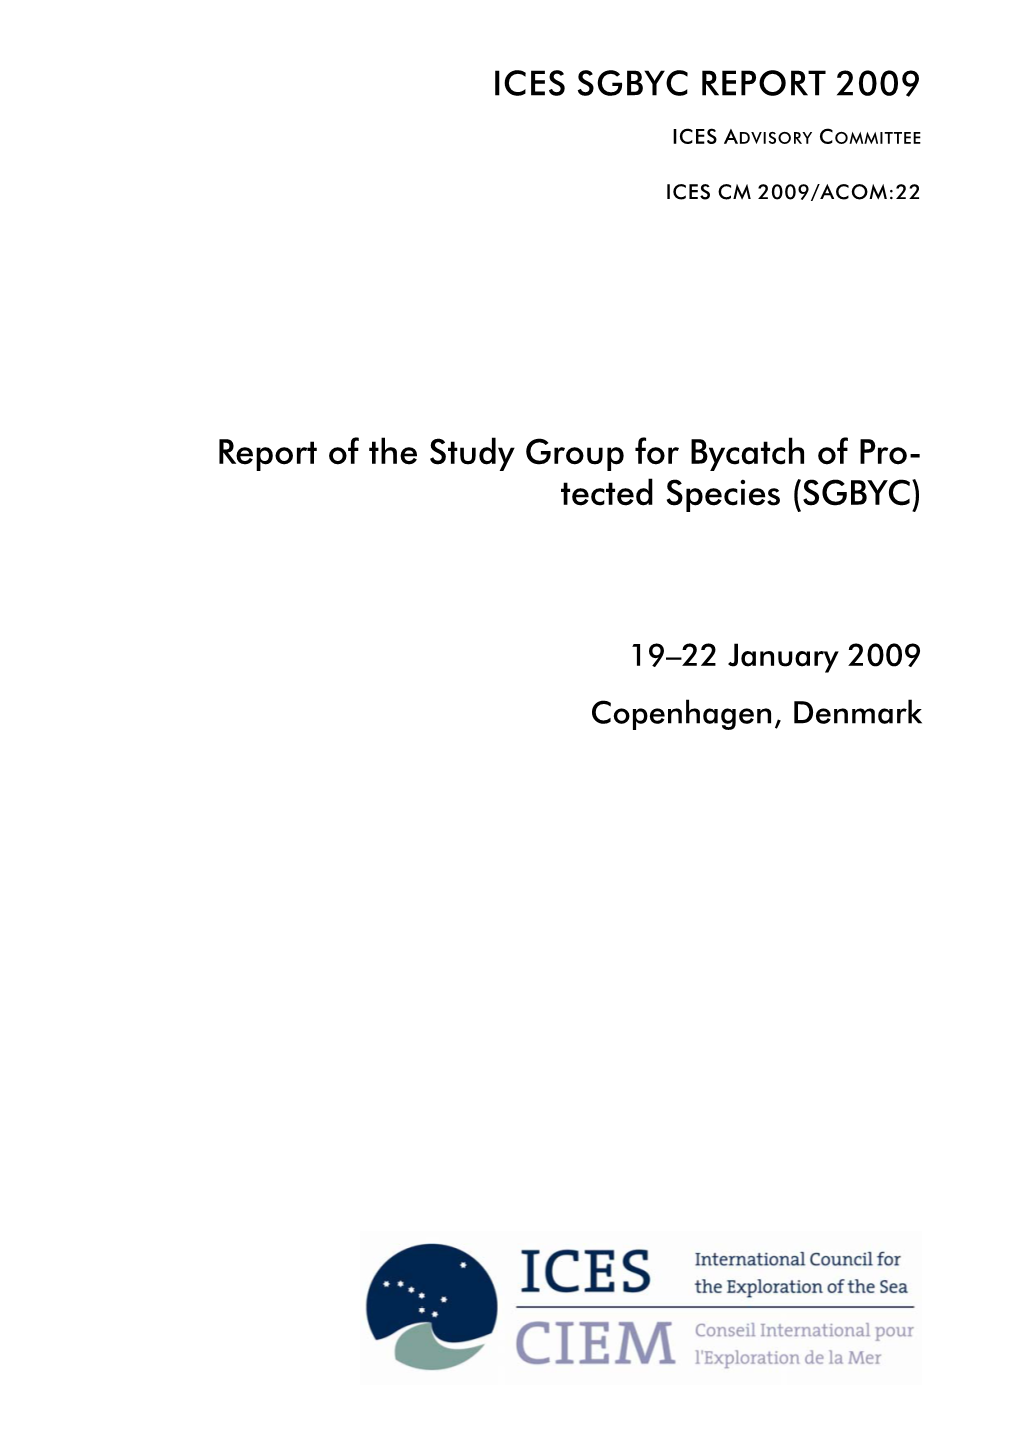 Report of the Study Group for Bycatch of Protected Species (SGBYC), 19– 22 January 2009, Copenhagen, Denmark